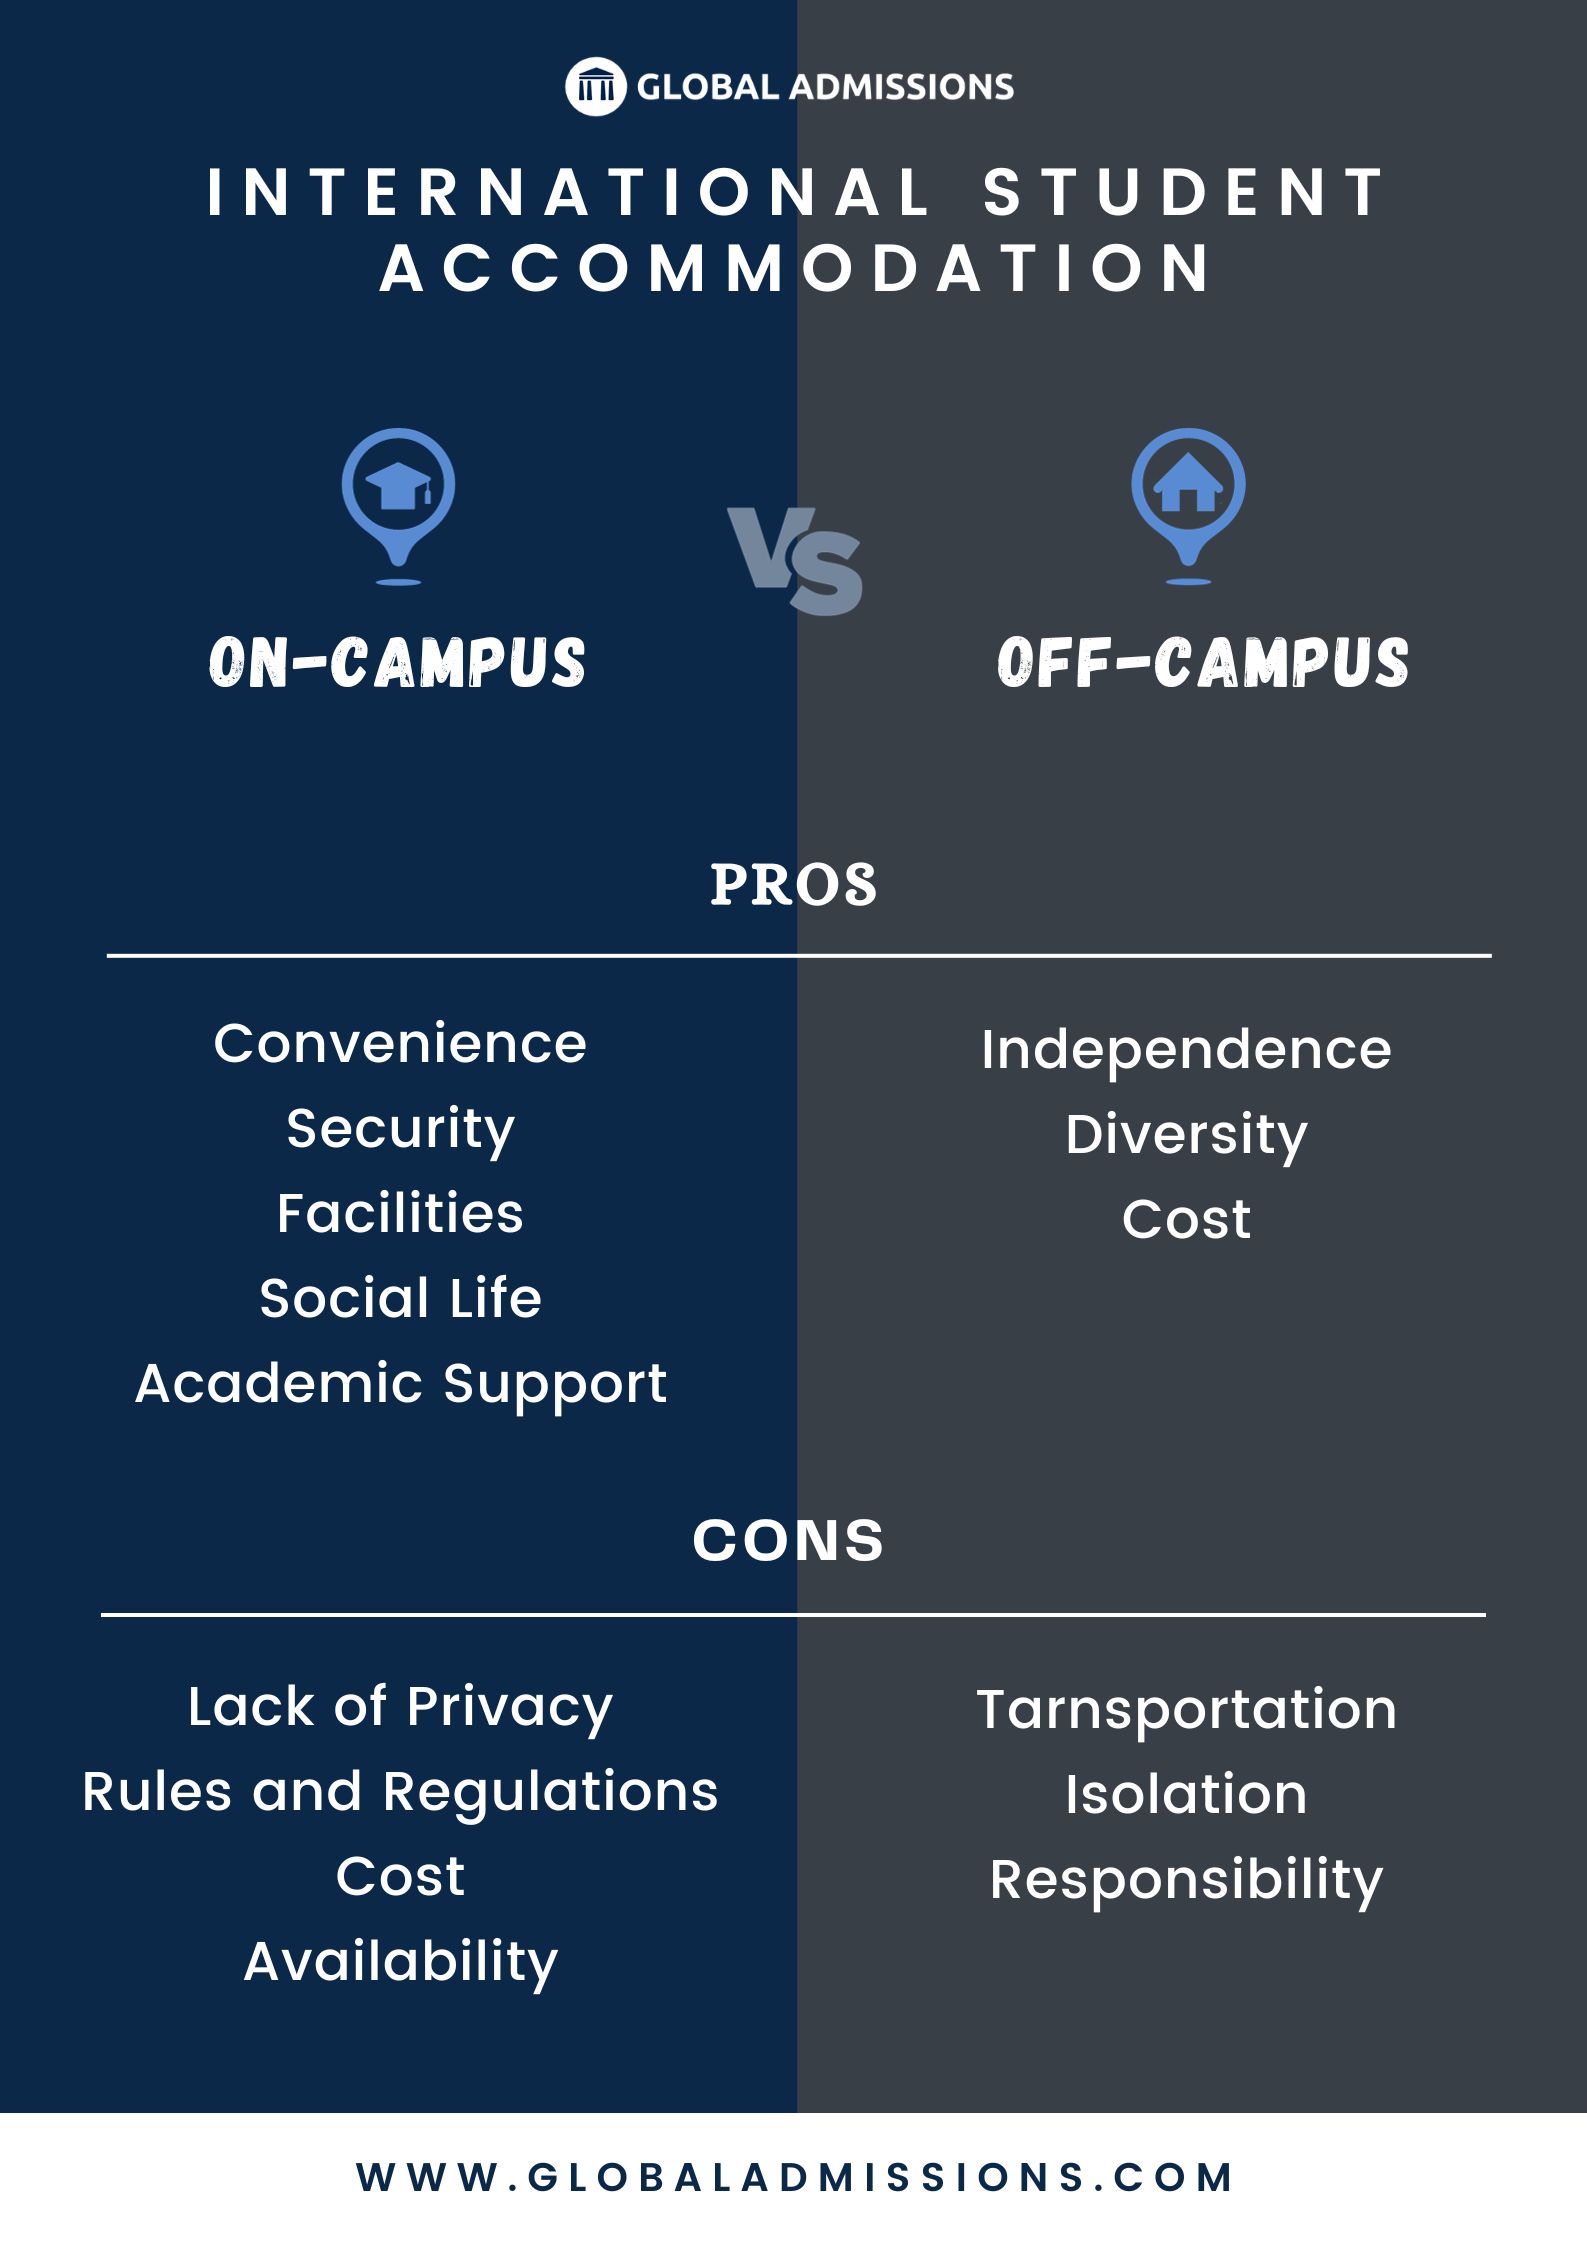 GuideBook Infographic - Student Affairs